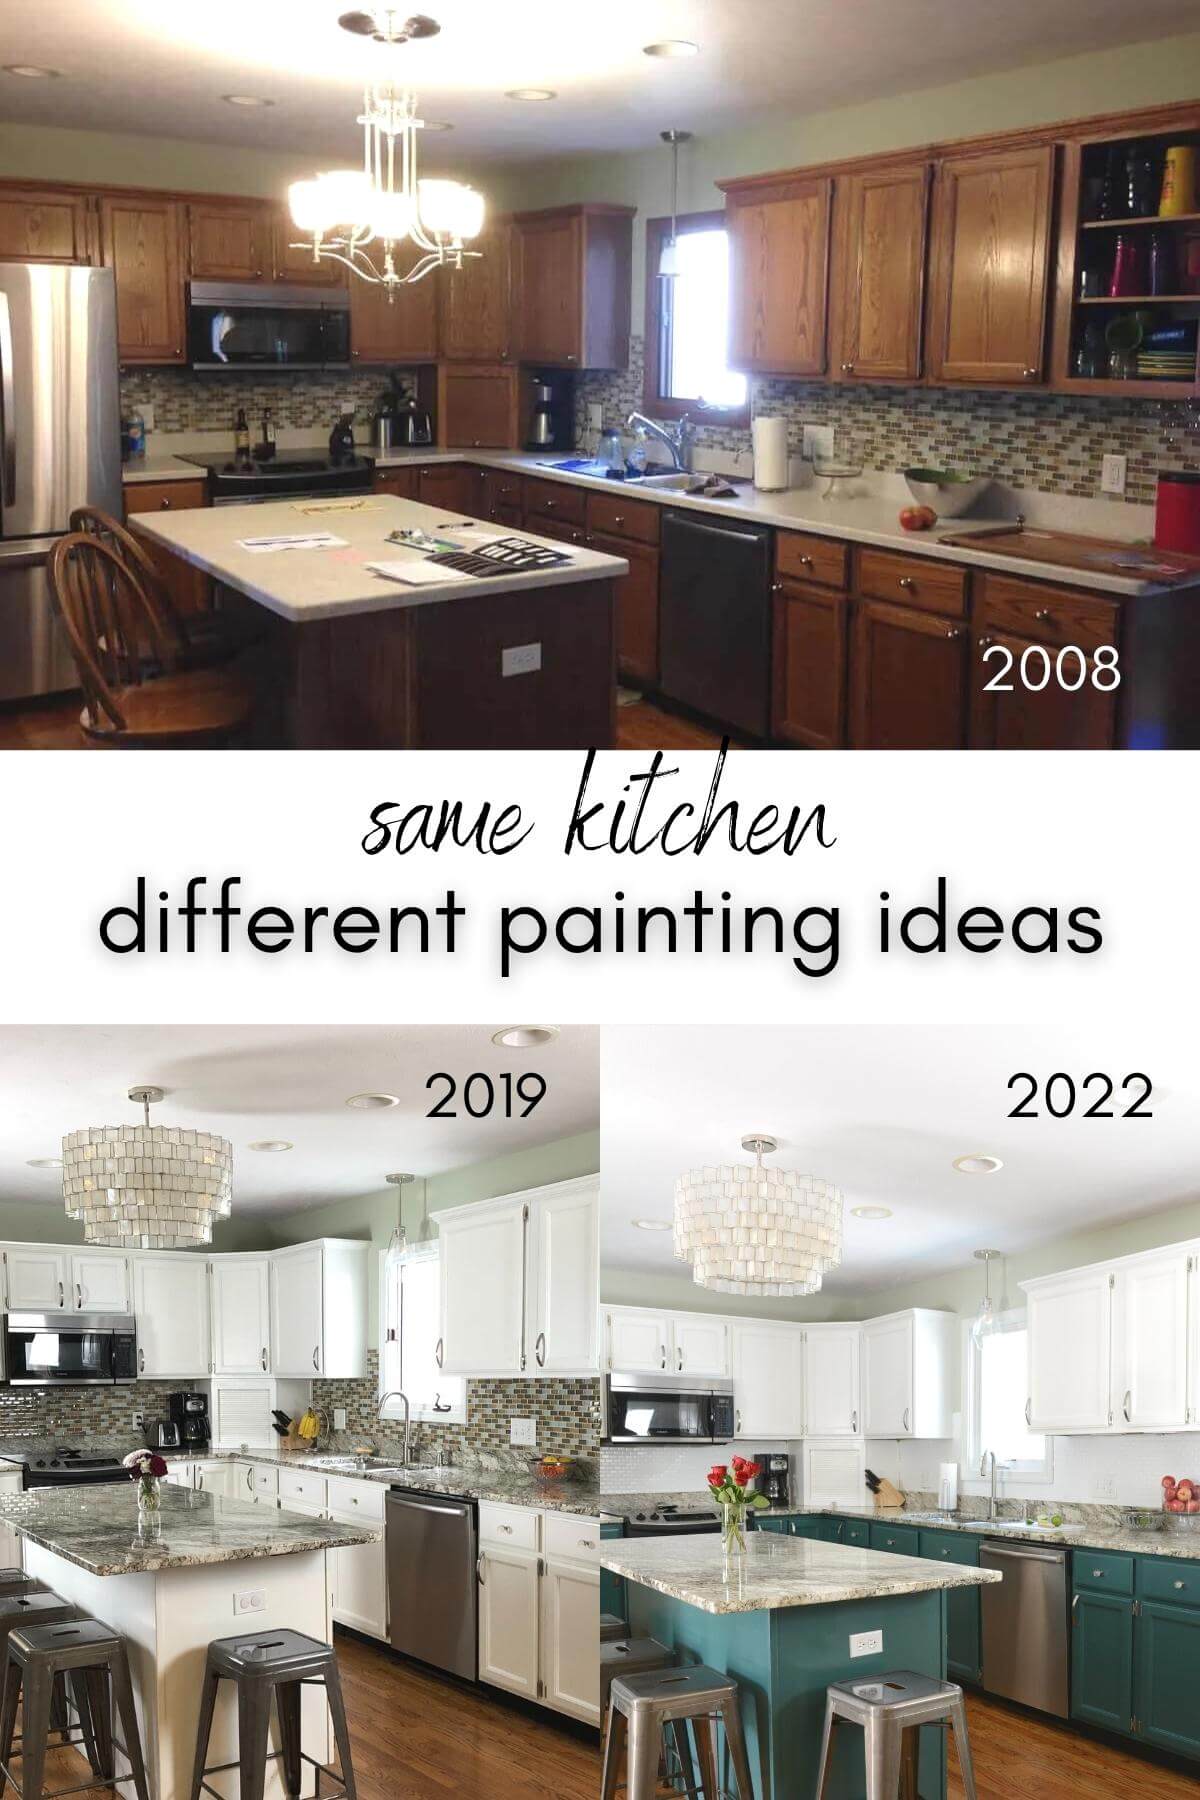 oak kitchen cabinets with 2008 with white painted kitchen cabinets in 2019 and two-toned green and white kitchen cabinets in 2022.